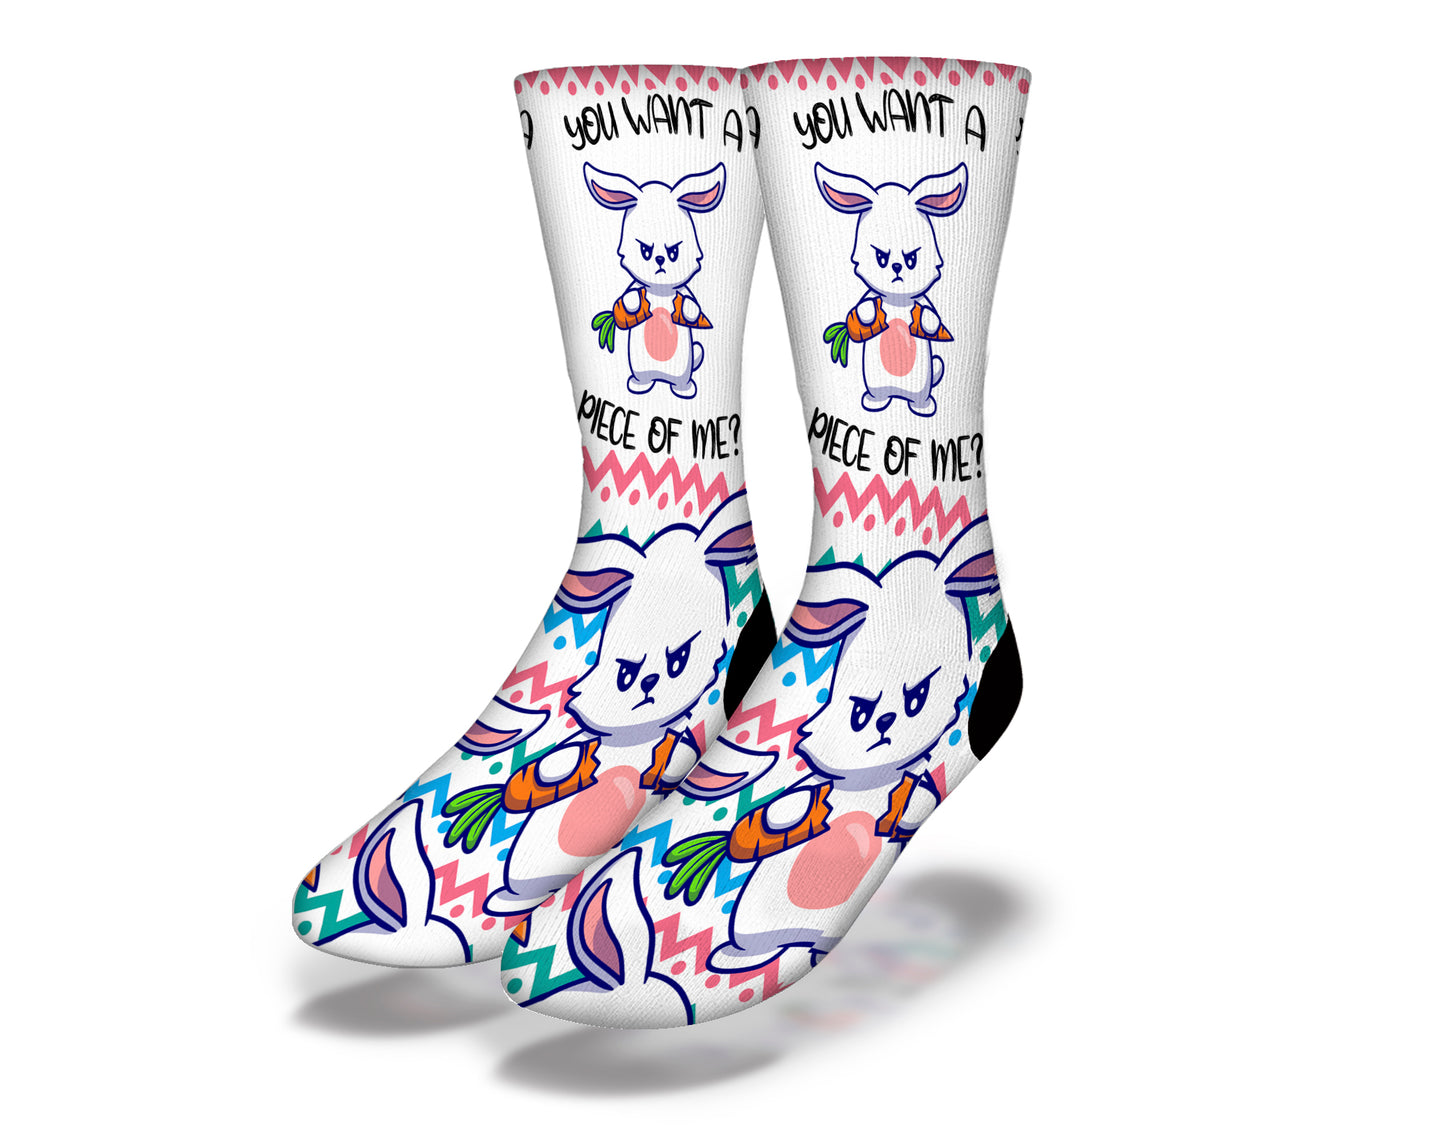 "YOU WANT A PIECE OF ME?" Fun Easter Bunny Socks (Multi)